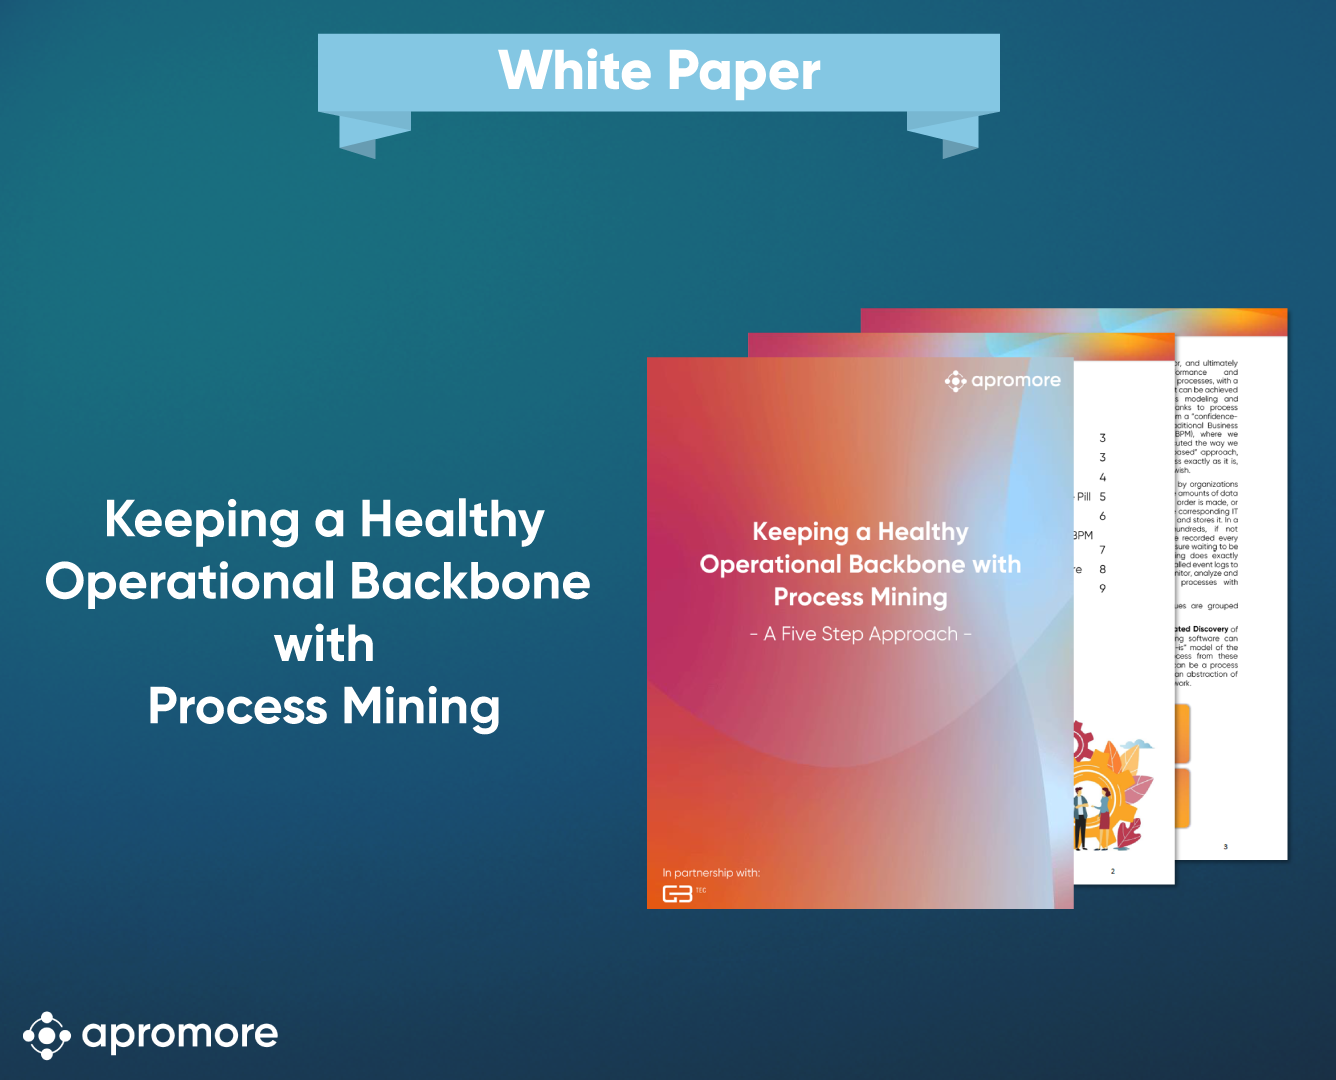 White Paper: “Keeping a Healthy Operational Backbone with Process Mining”